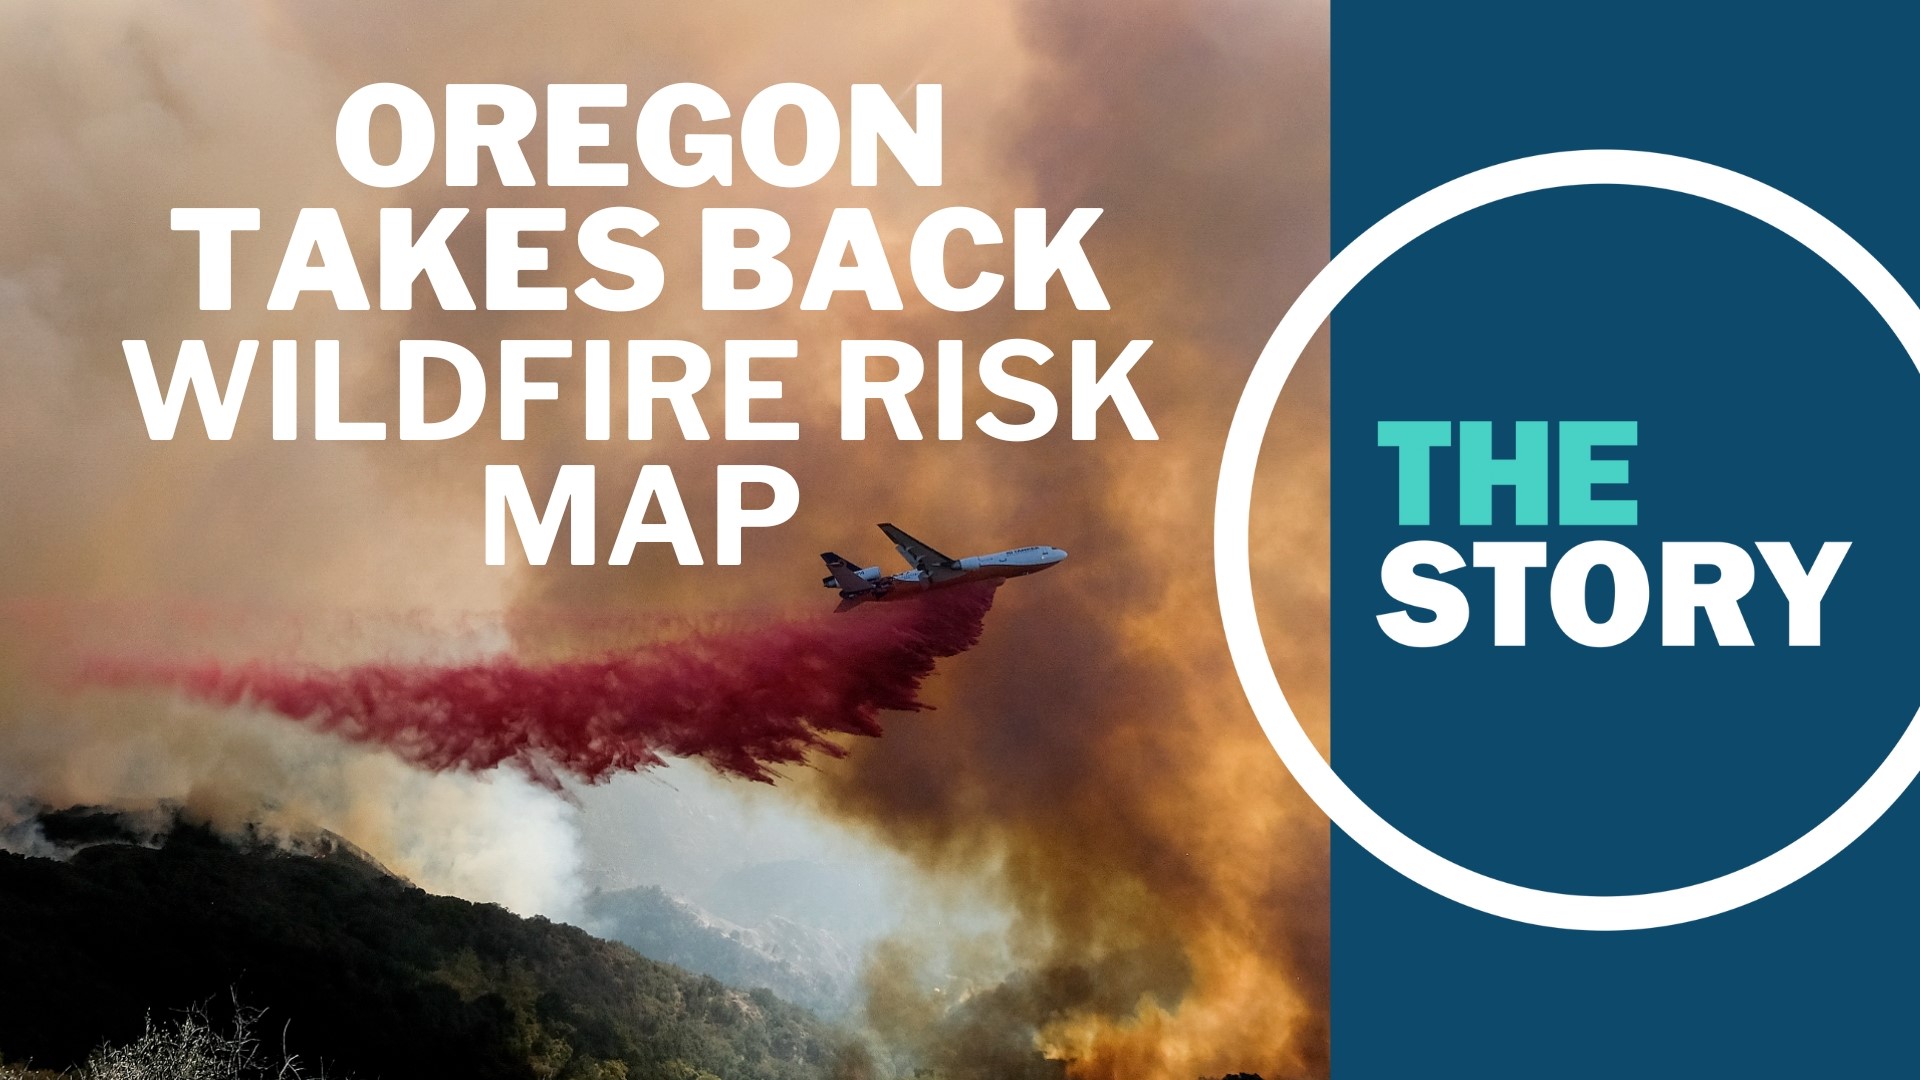 The map was created for a good reason — to inform people whether their homes could be threatened by wildfire. But it came with some major unintended consequences.